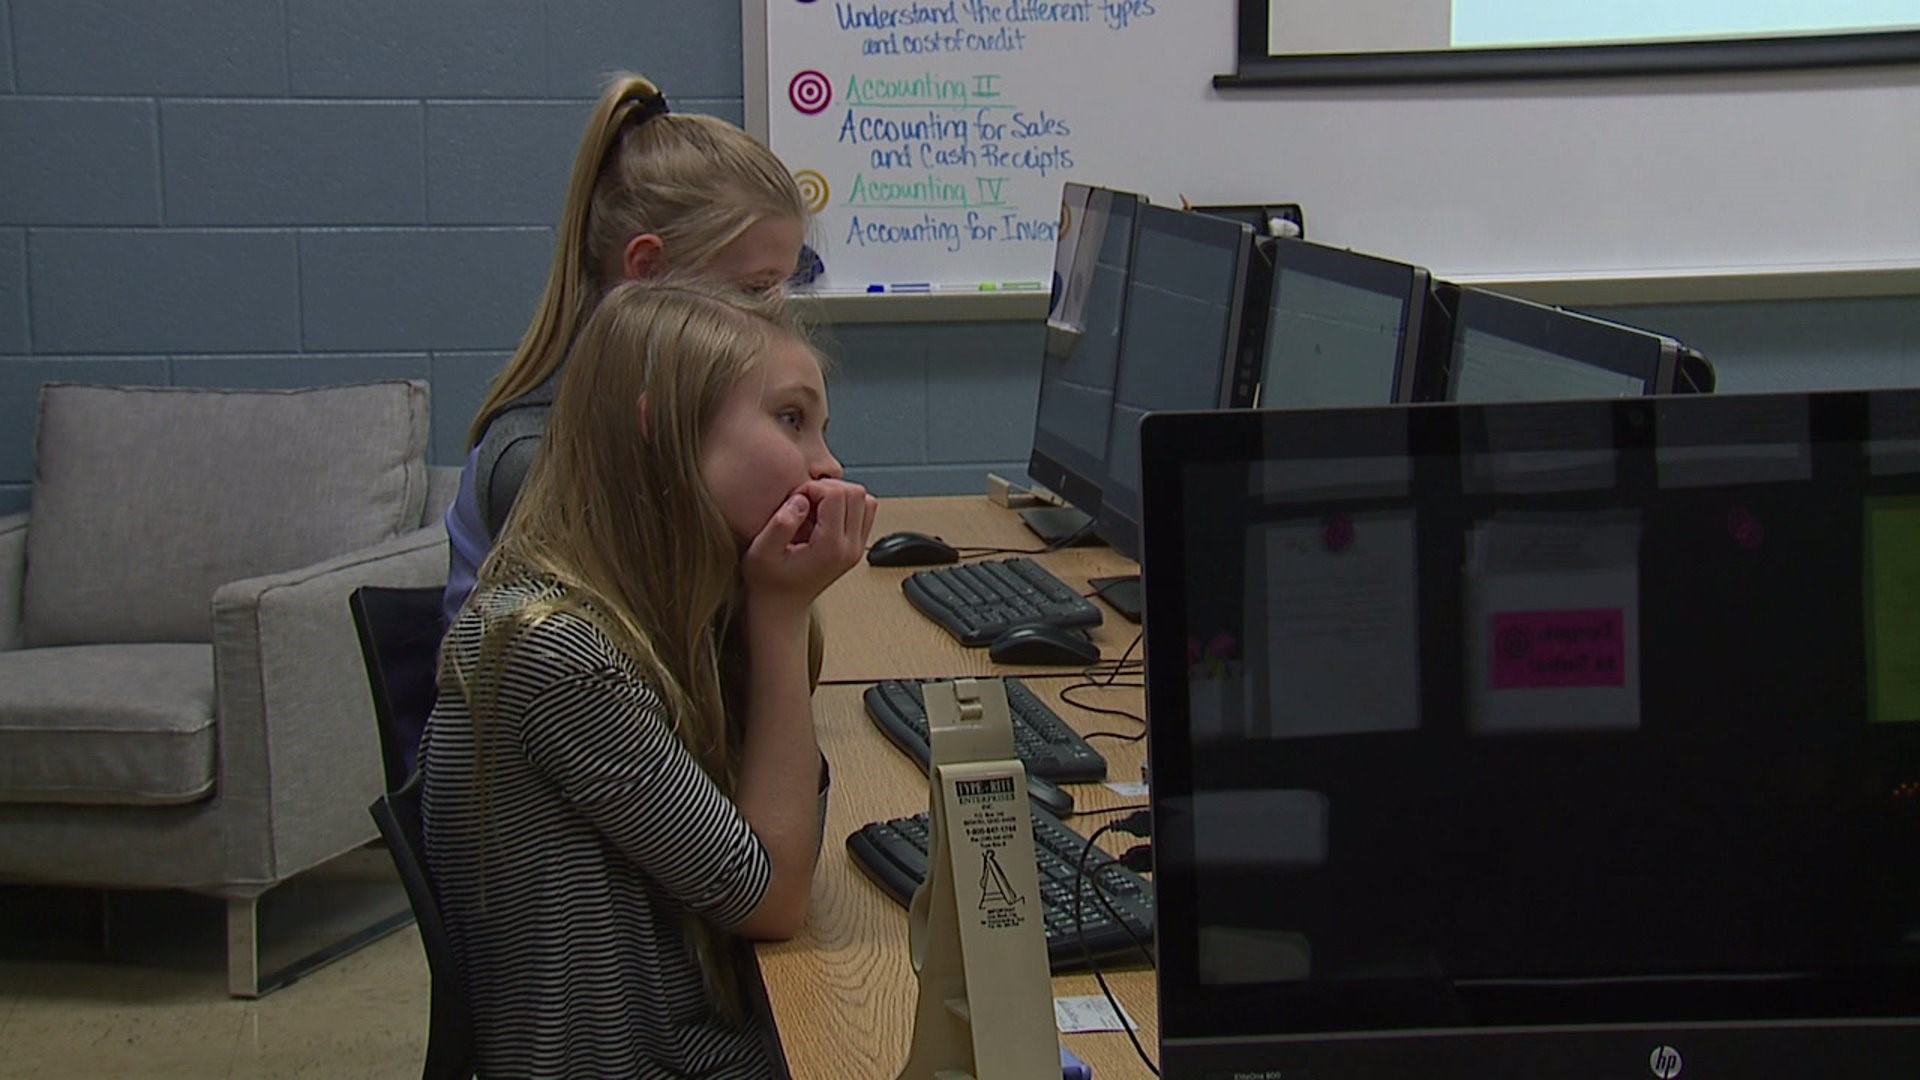 Knox County Students to Take Part in Pilot Program